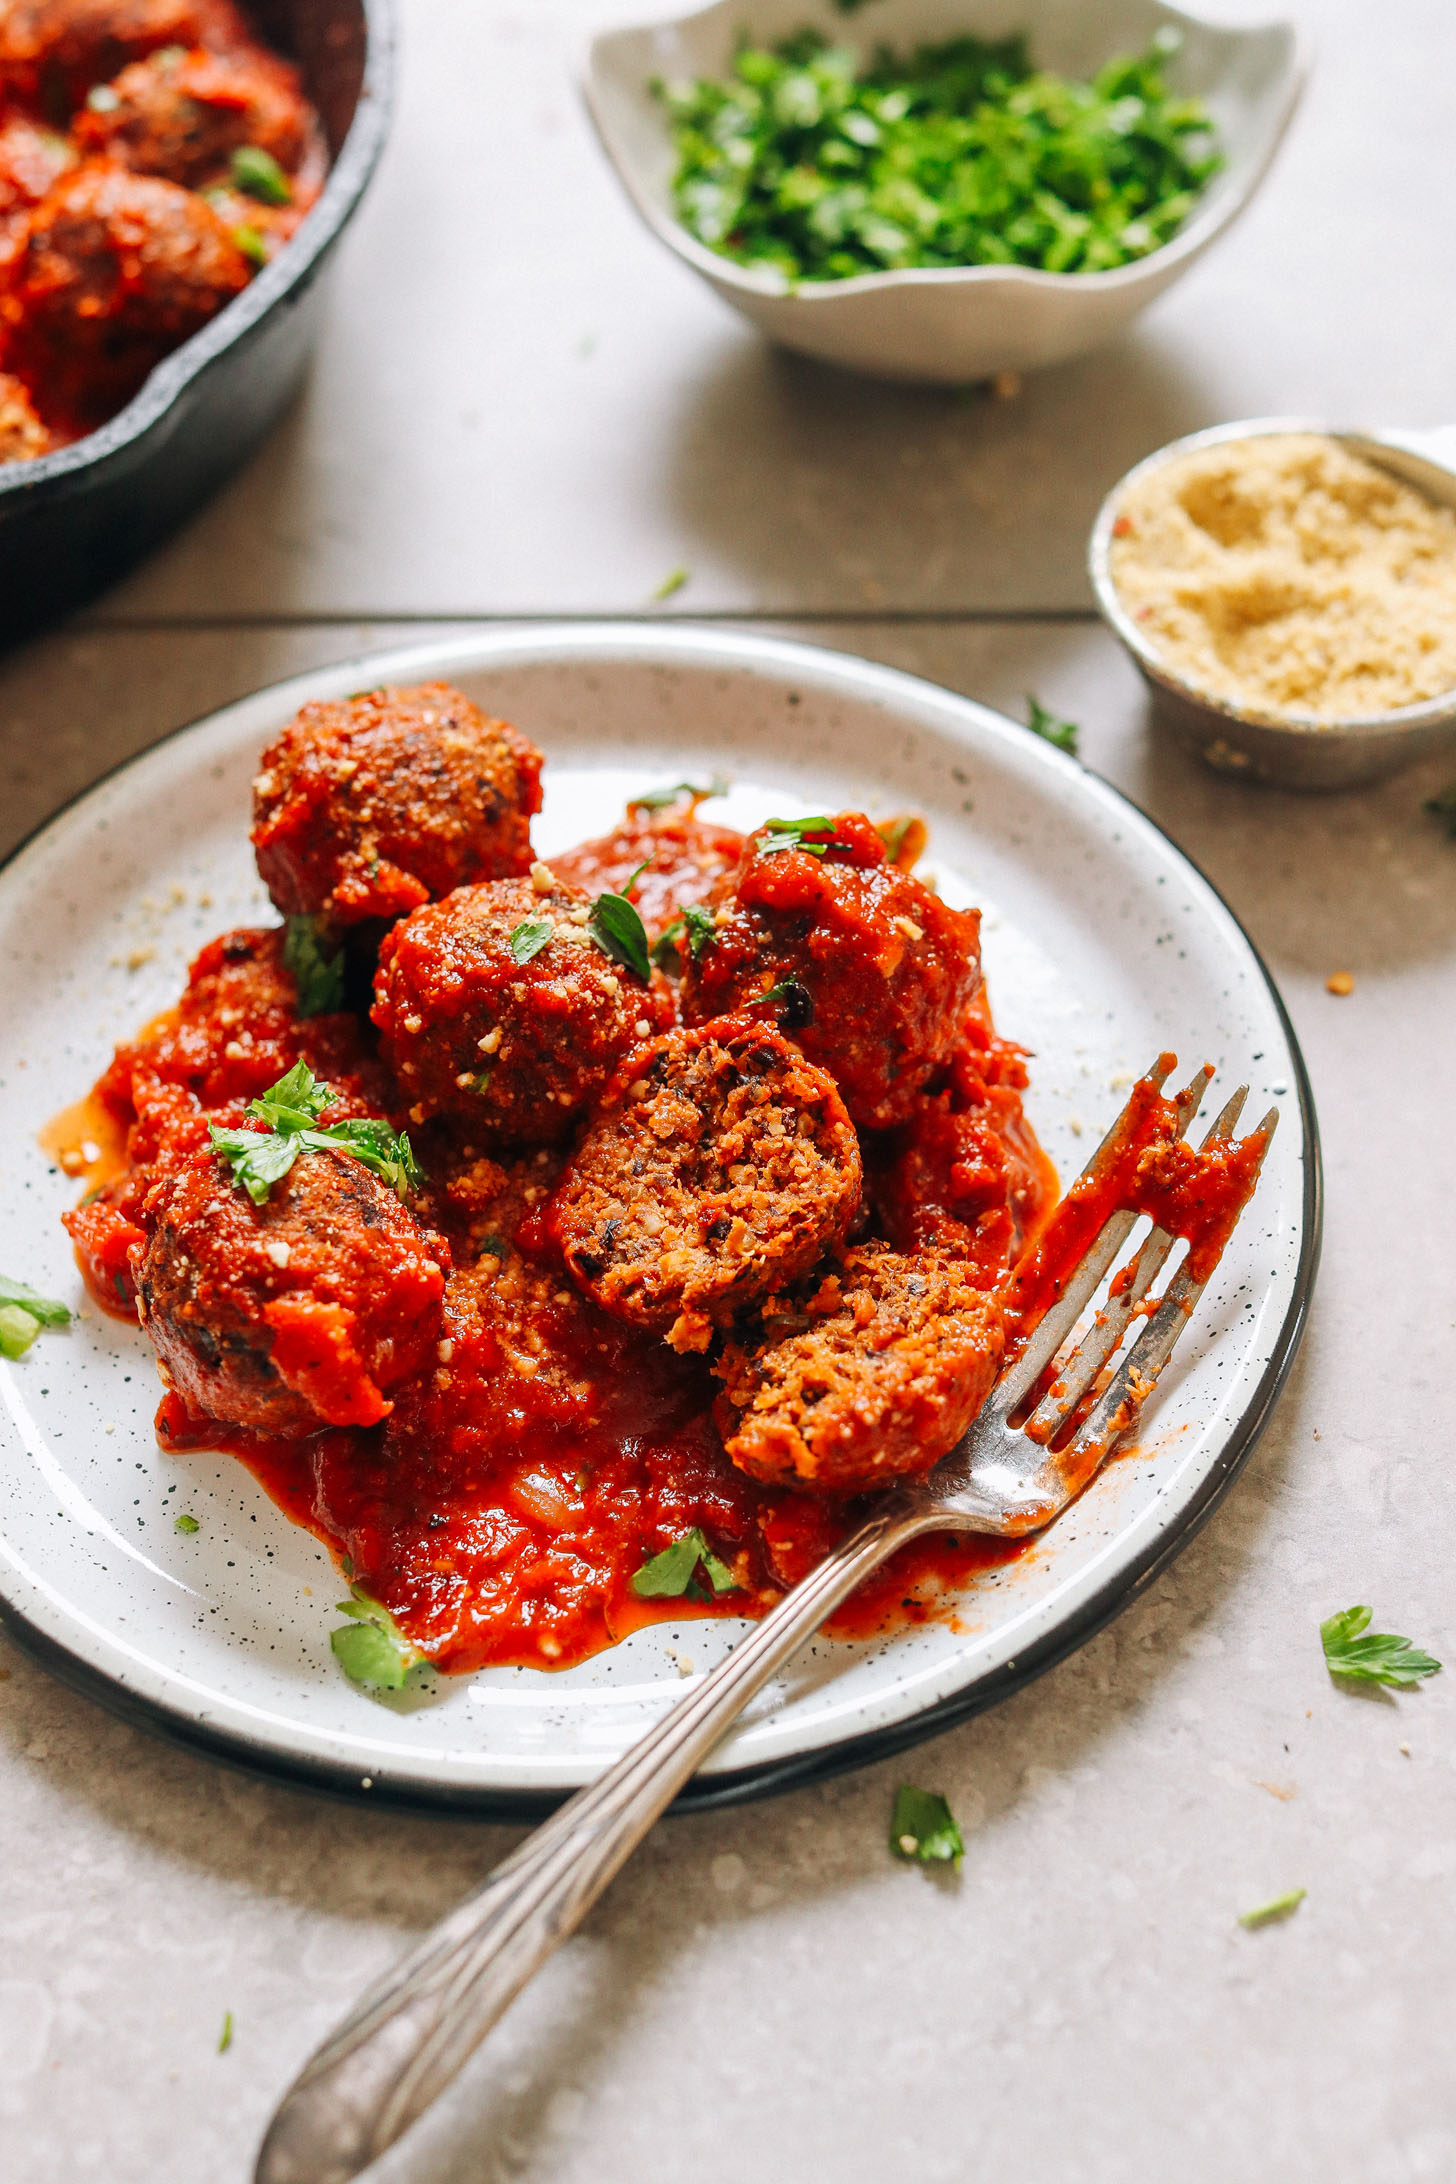 Dinner plate filled with delicious homemade vegan meatballs